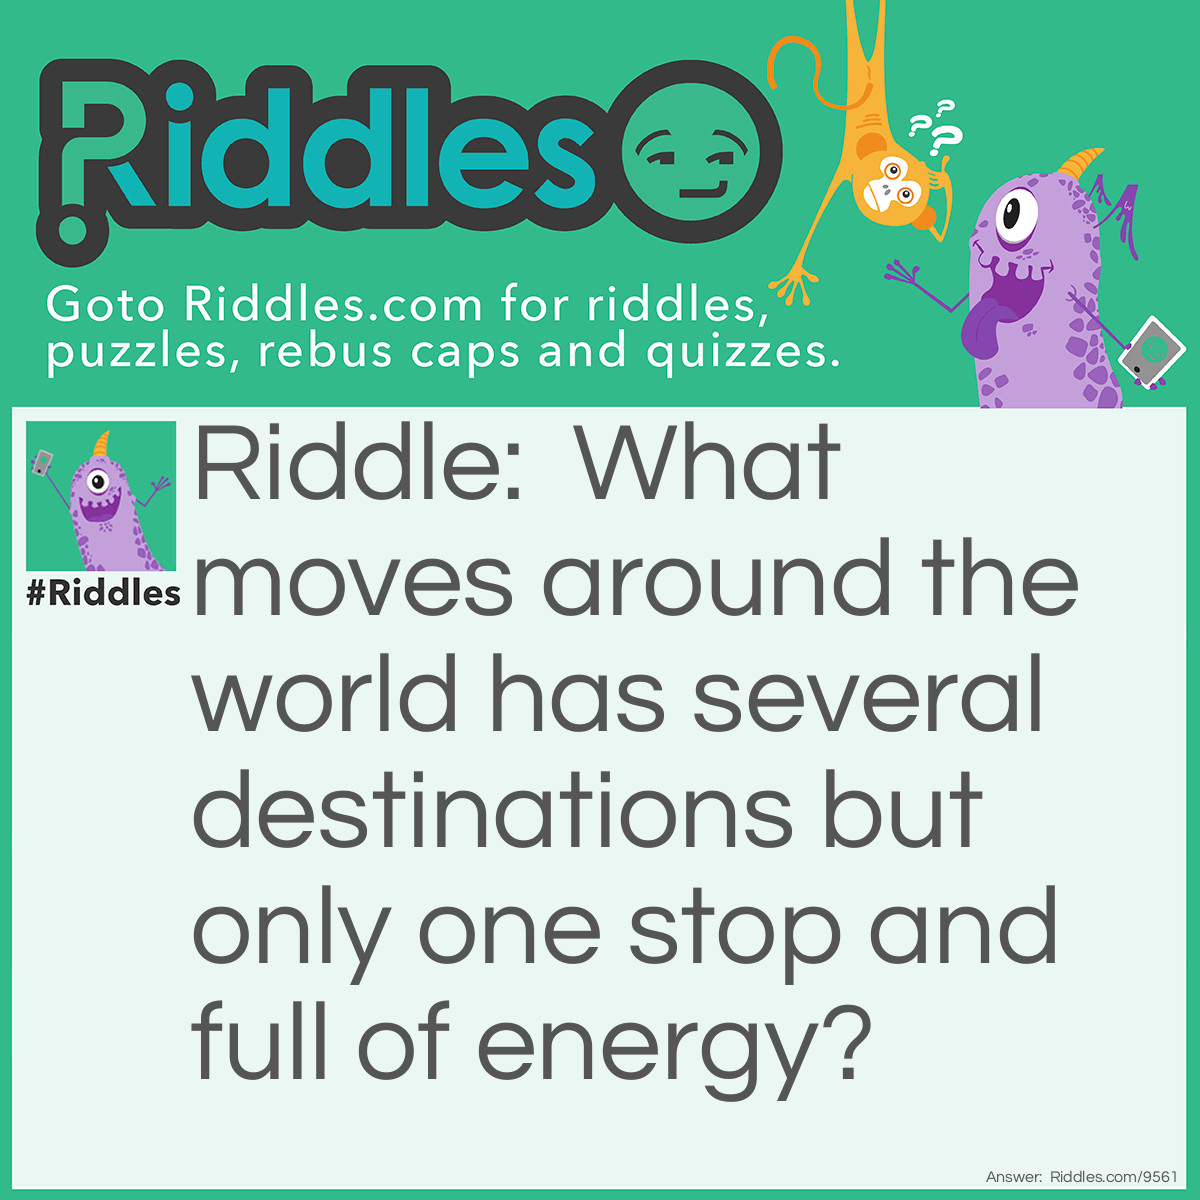 Riddle: What moves around the world has several destinations but only one stop and full of energy? Answer: Idk the answer lol